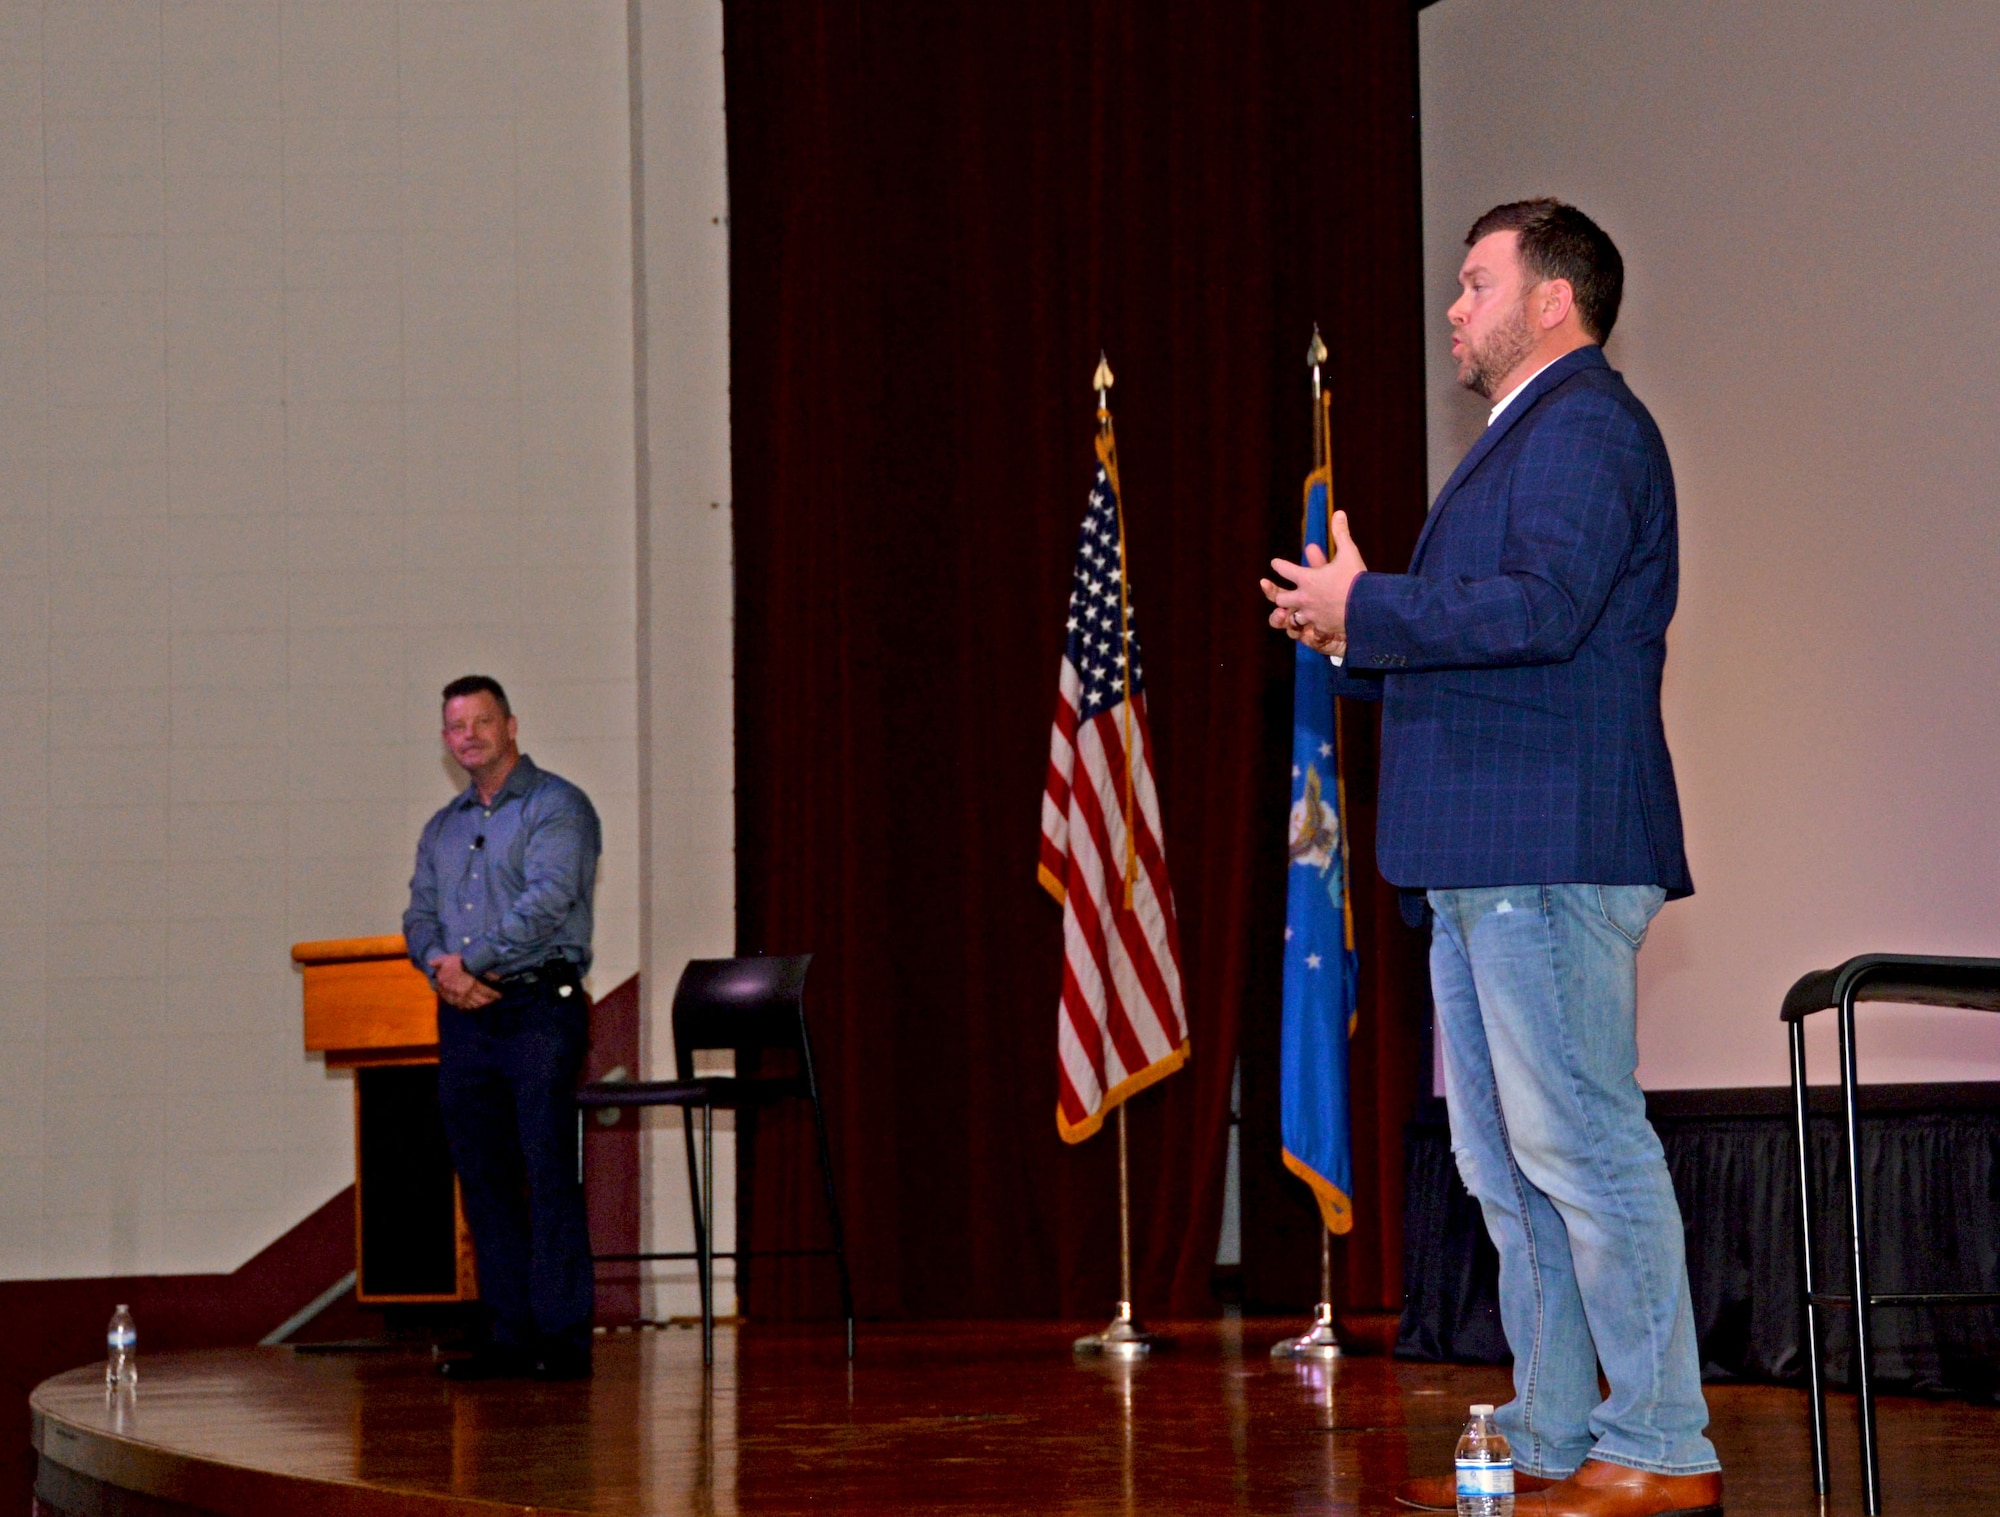 Ernie Stevens and Joe Smarro, San Antonio Police Department Mental Health Unit officers, answer questions from Airmen and families during the 960th Cyberspace Wing Mental Health and Resiliency Fair, May 1, 2021, at Joint Base San Antonio-Lackland, Texas. (U.S. Air Force photo by Tech. Sgt. Samantha Mathison)